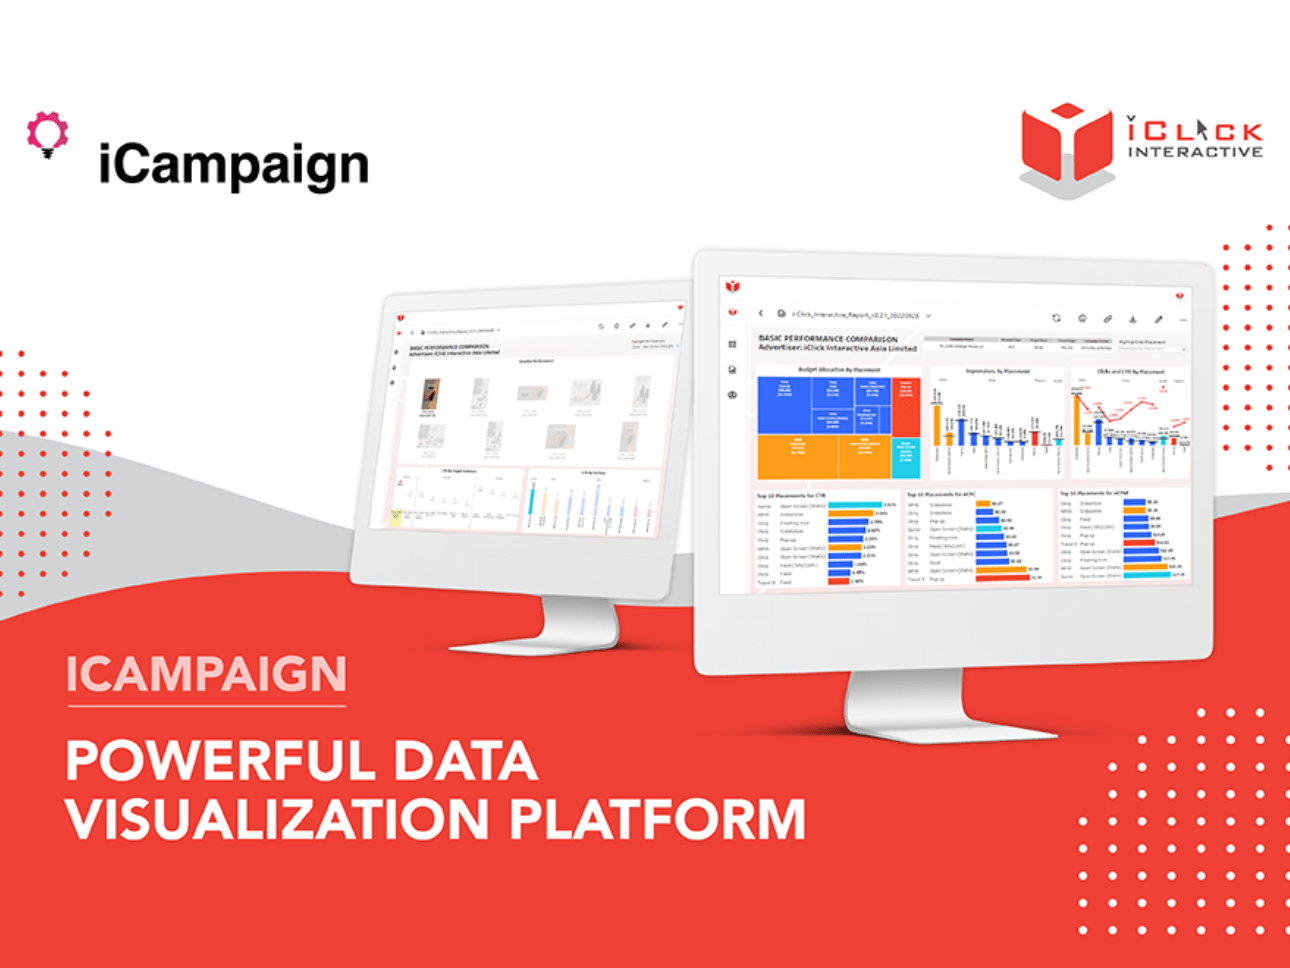 Launch of iCampaign – Powerful Data Visualization Platform